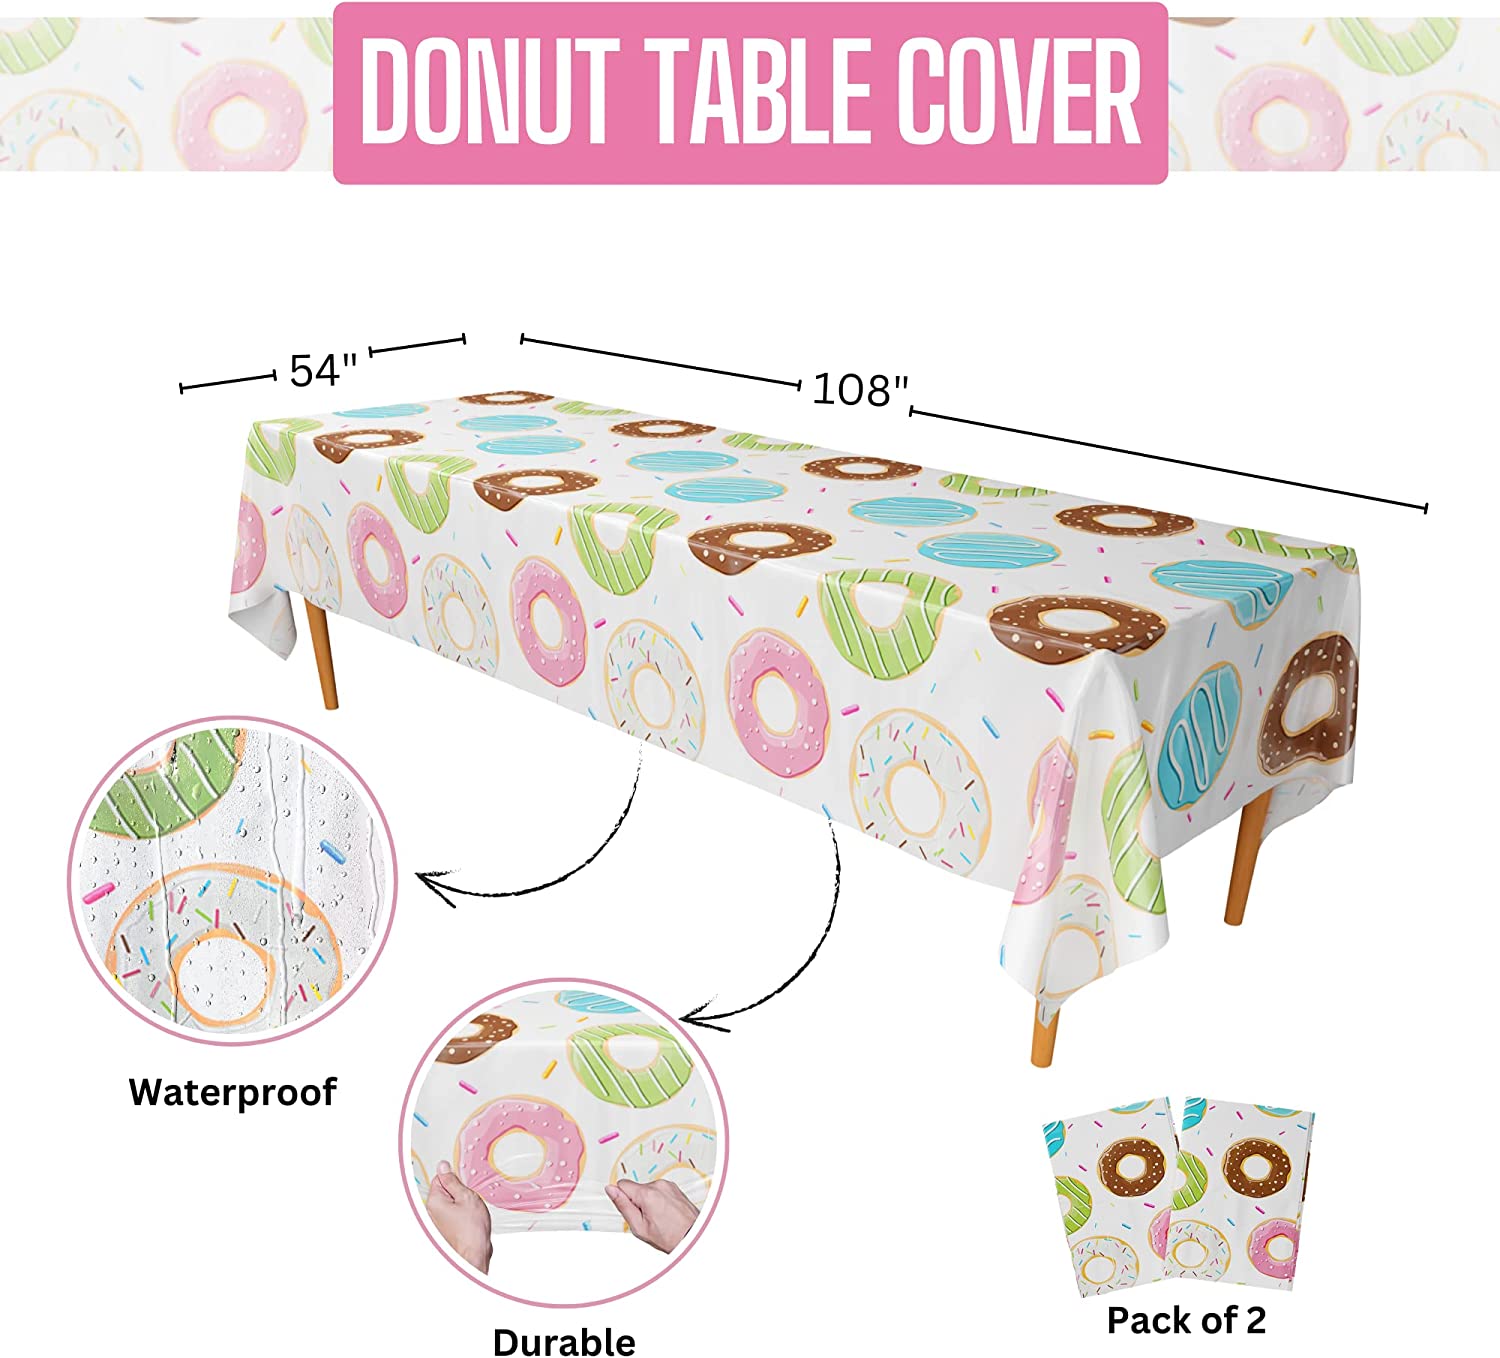 Waterproof and Durable Plastic Donut Table Cover